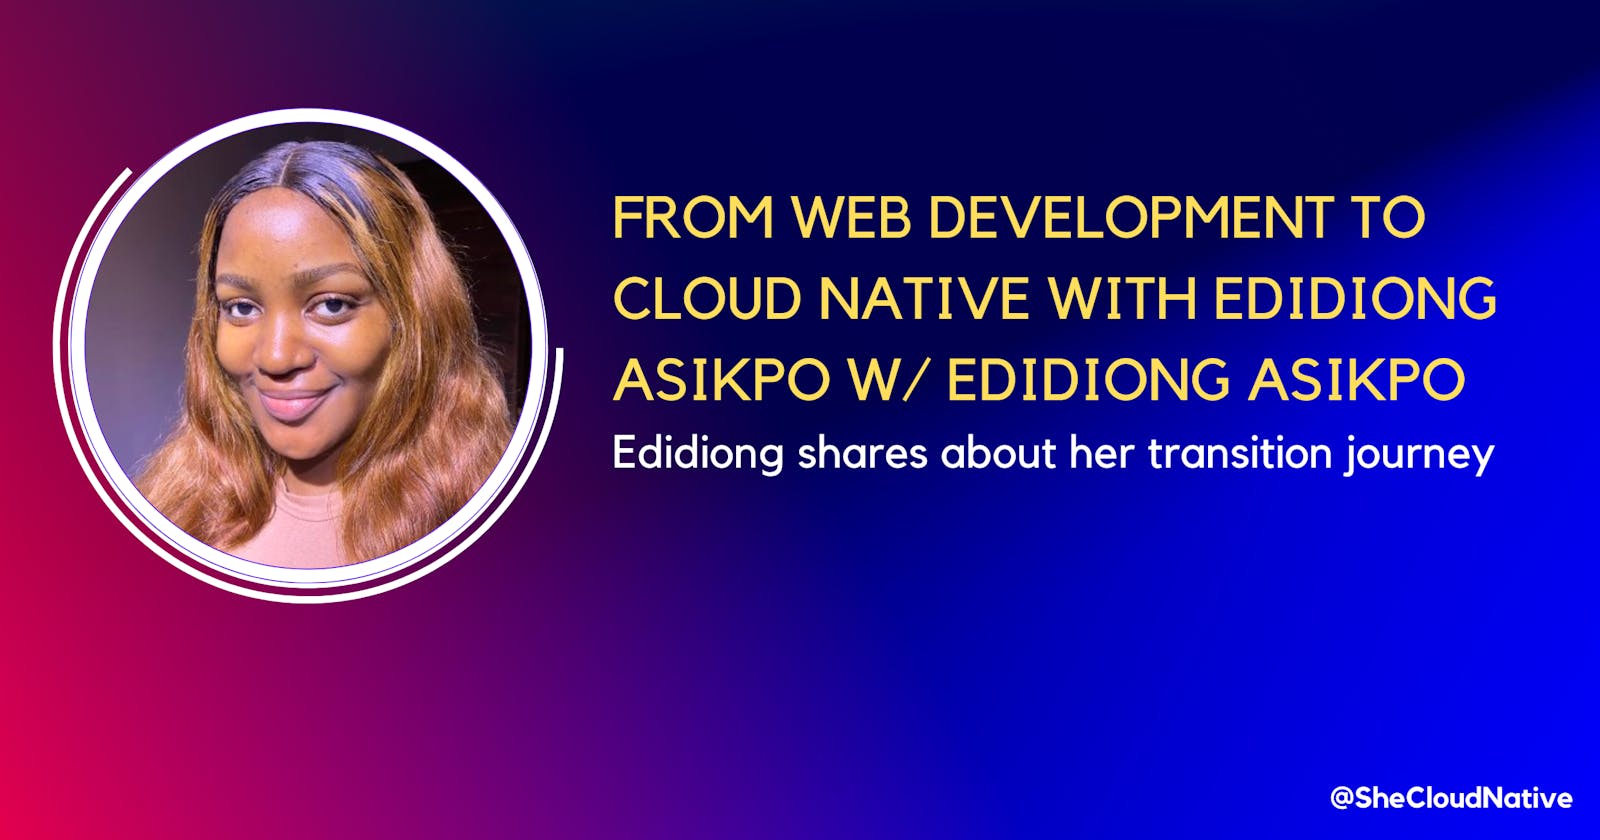 From Web Development to Cloud Native with Edidiong Asikpo